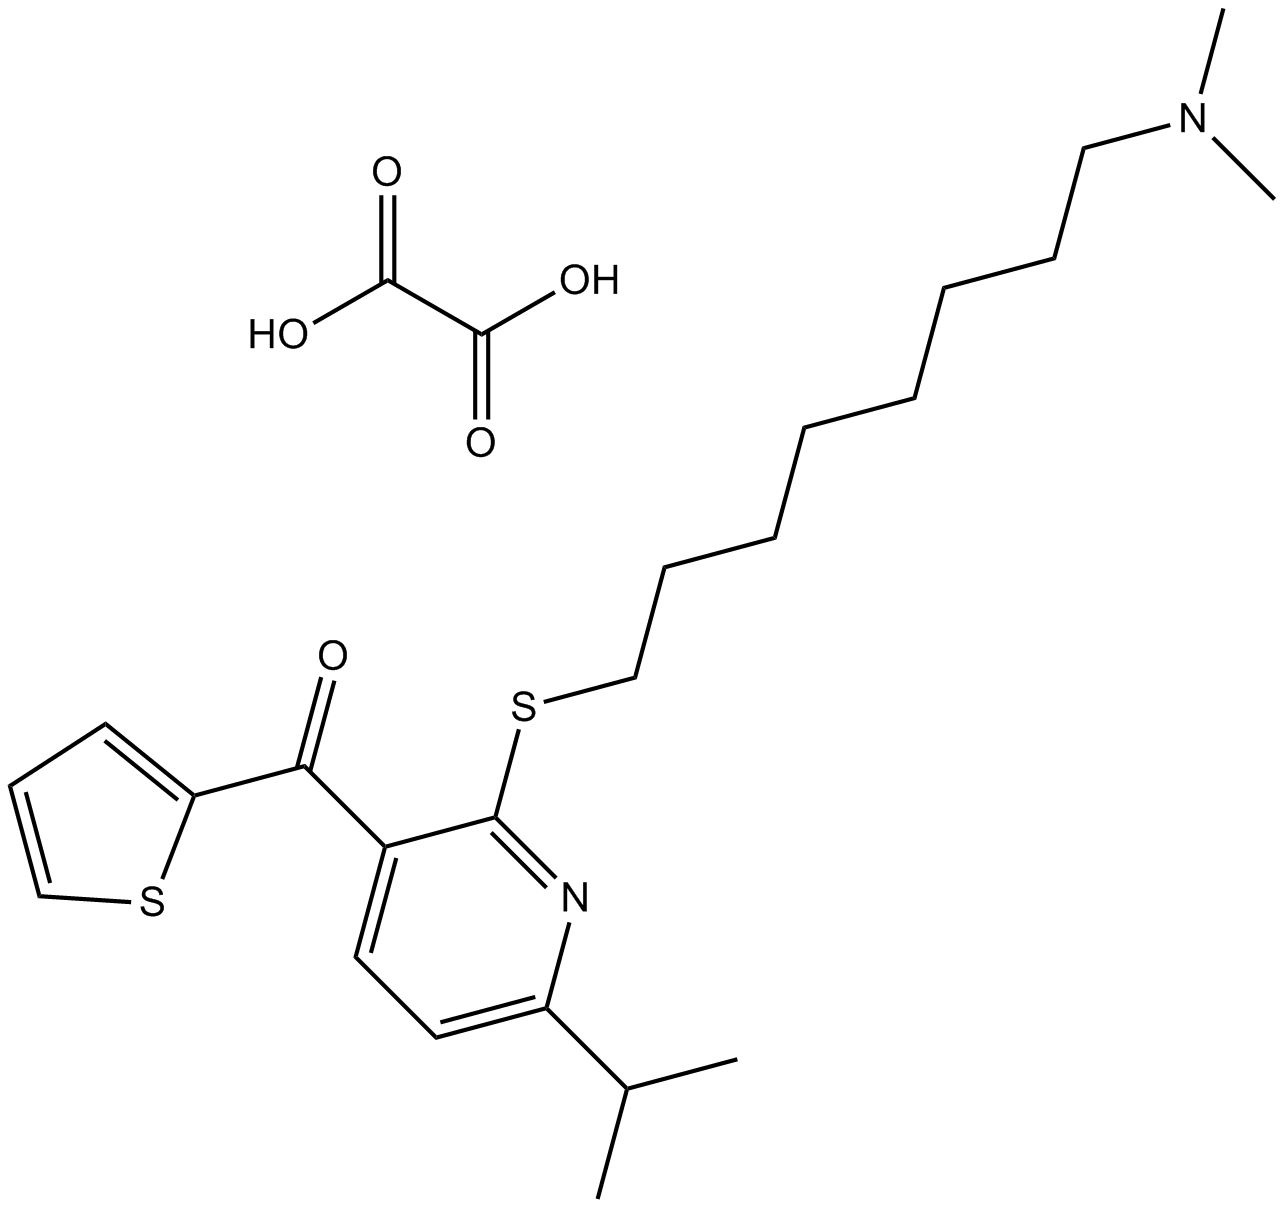 Y-29794 oxalate  Chemical Structure